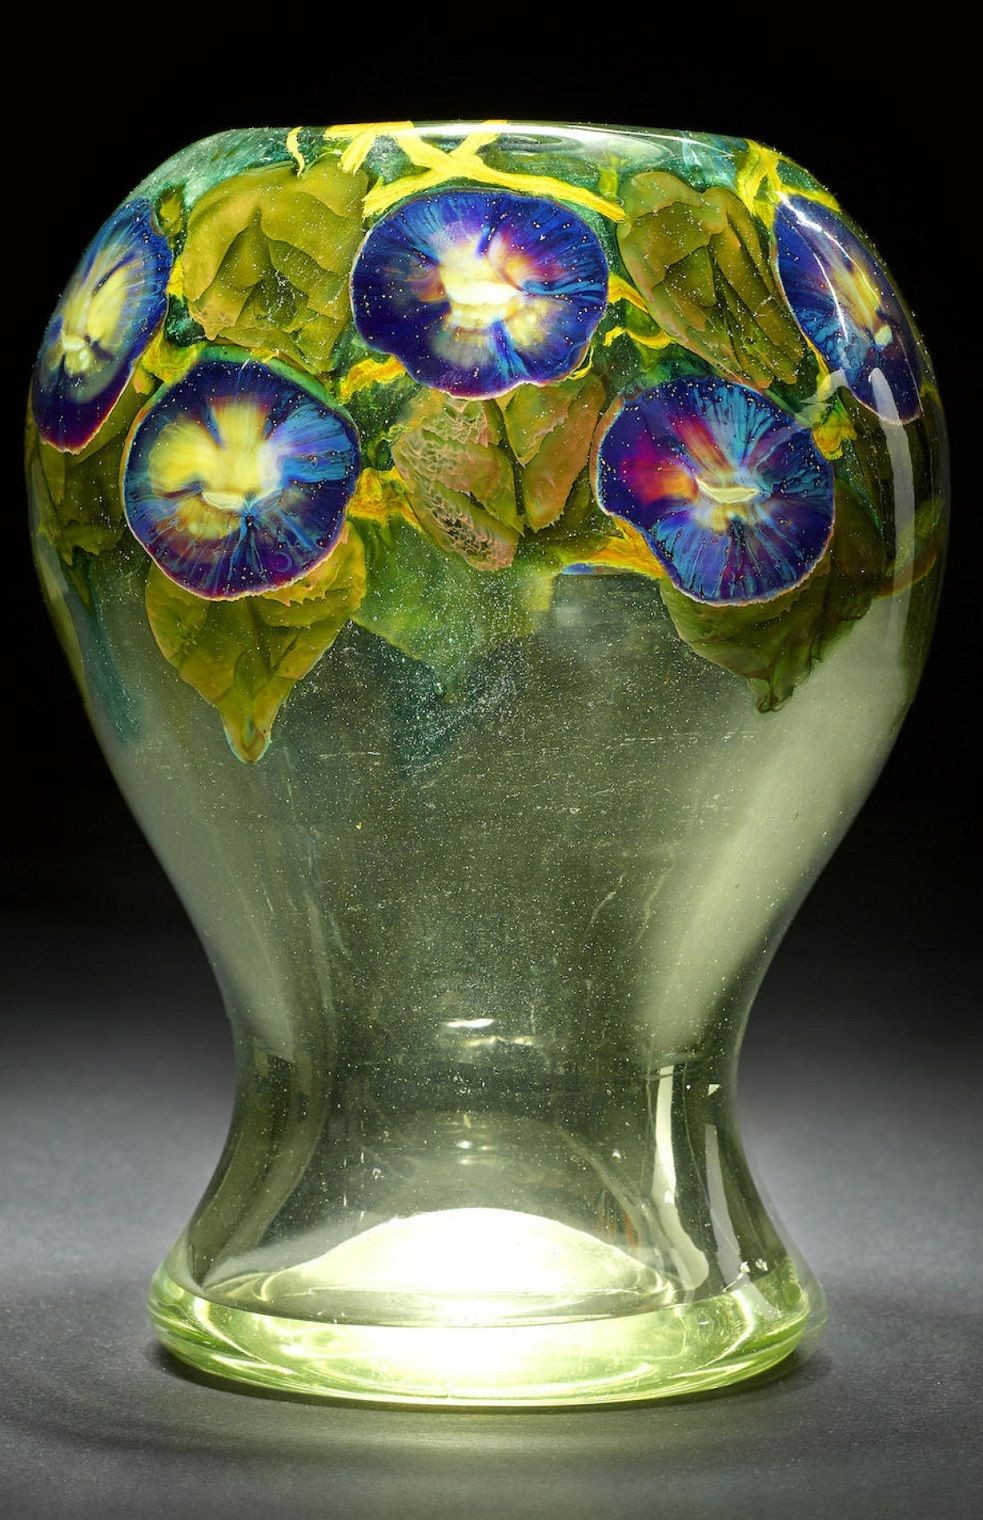 Crystal Block Vase Of 152 Best Czech Art Glass Images On Pinterest In 2018 Flower Vases In 152 Best Czech Art Glass Images On Pinterest In 2018 Flower Vases Vases and Crystals